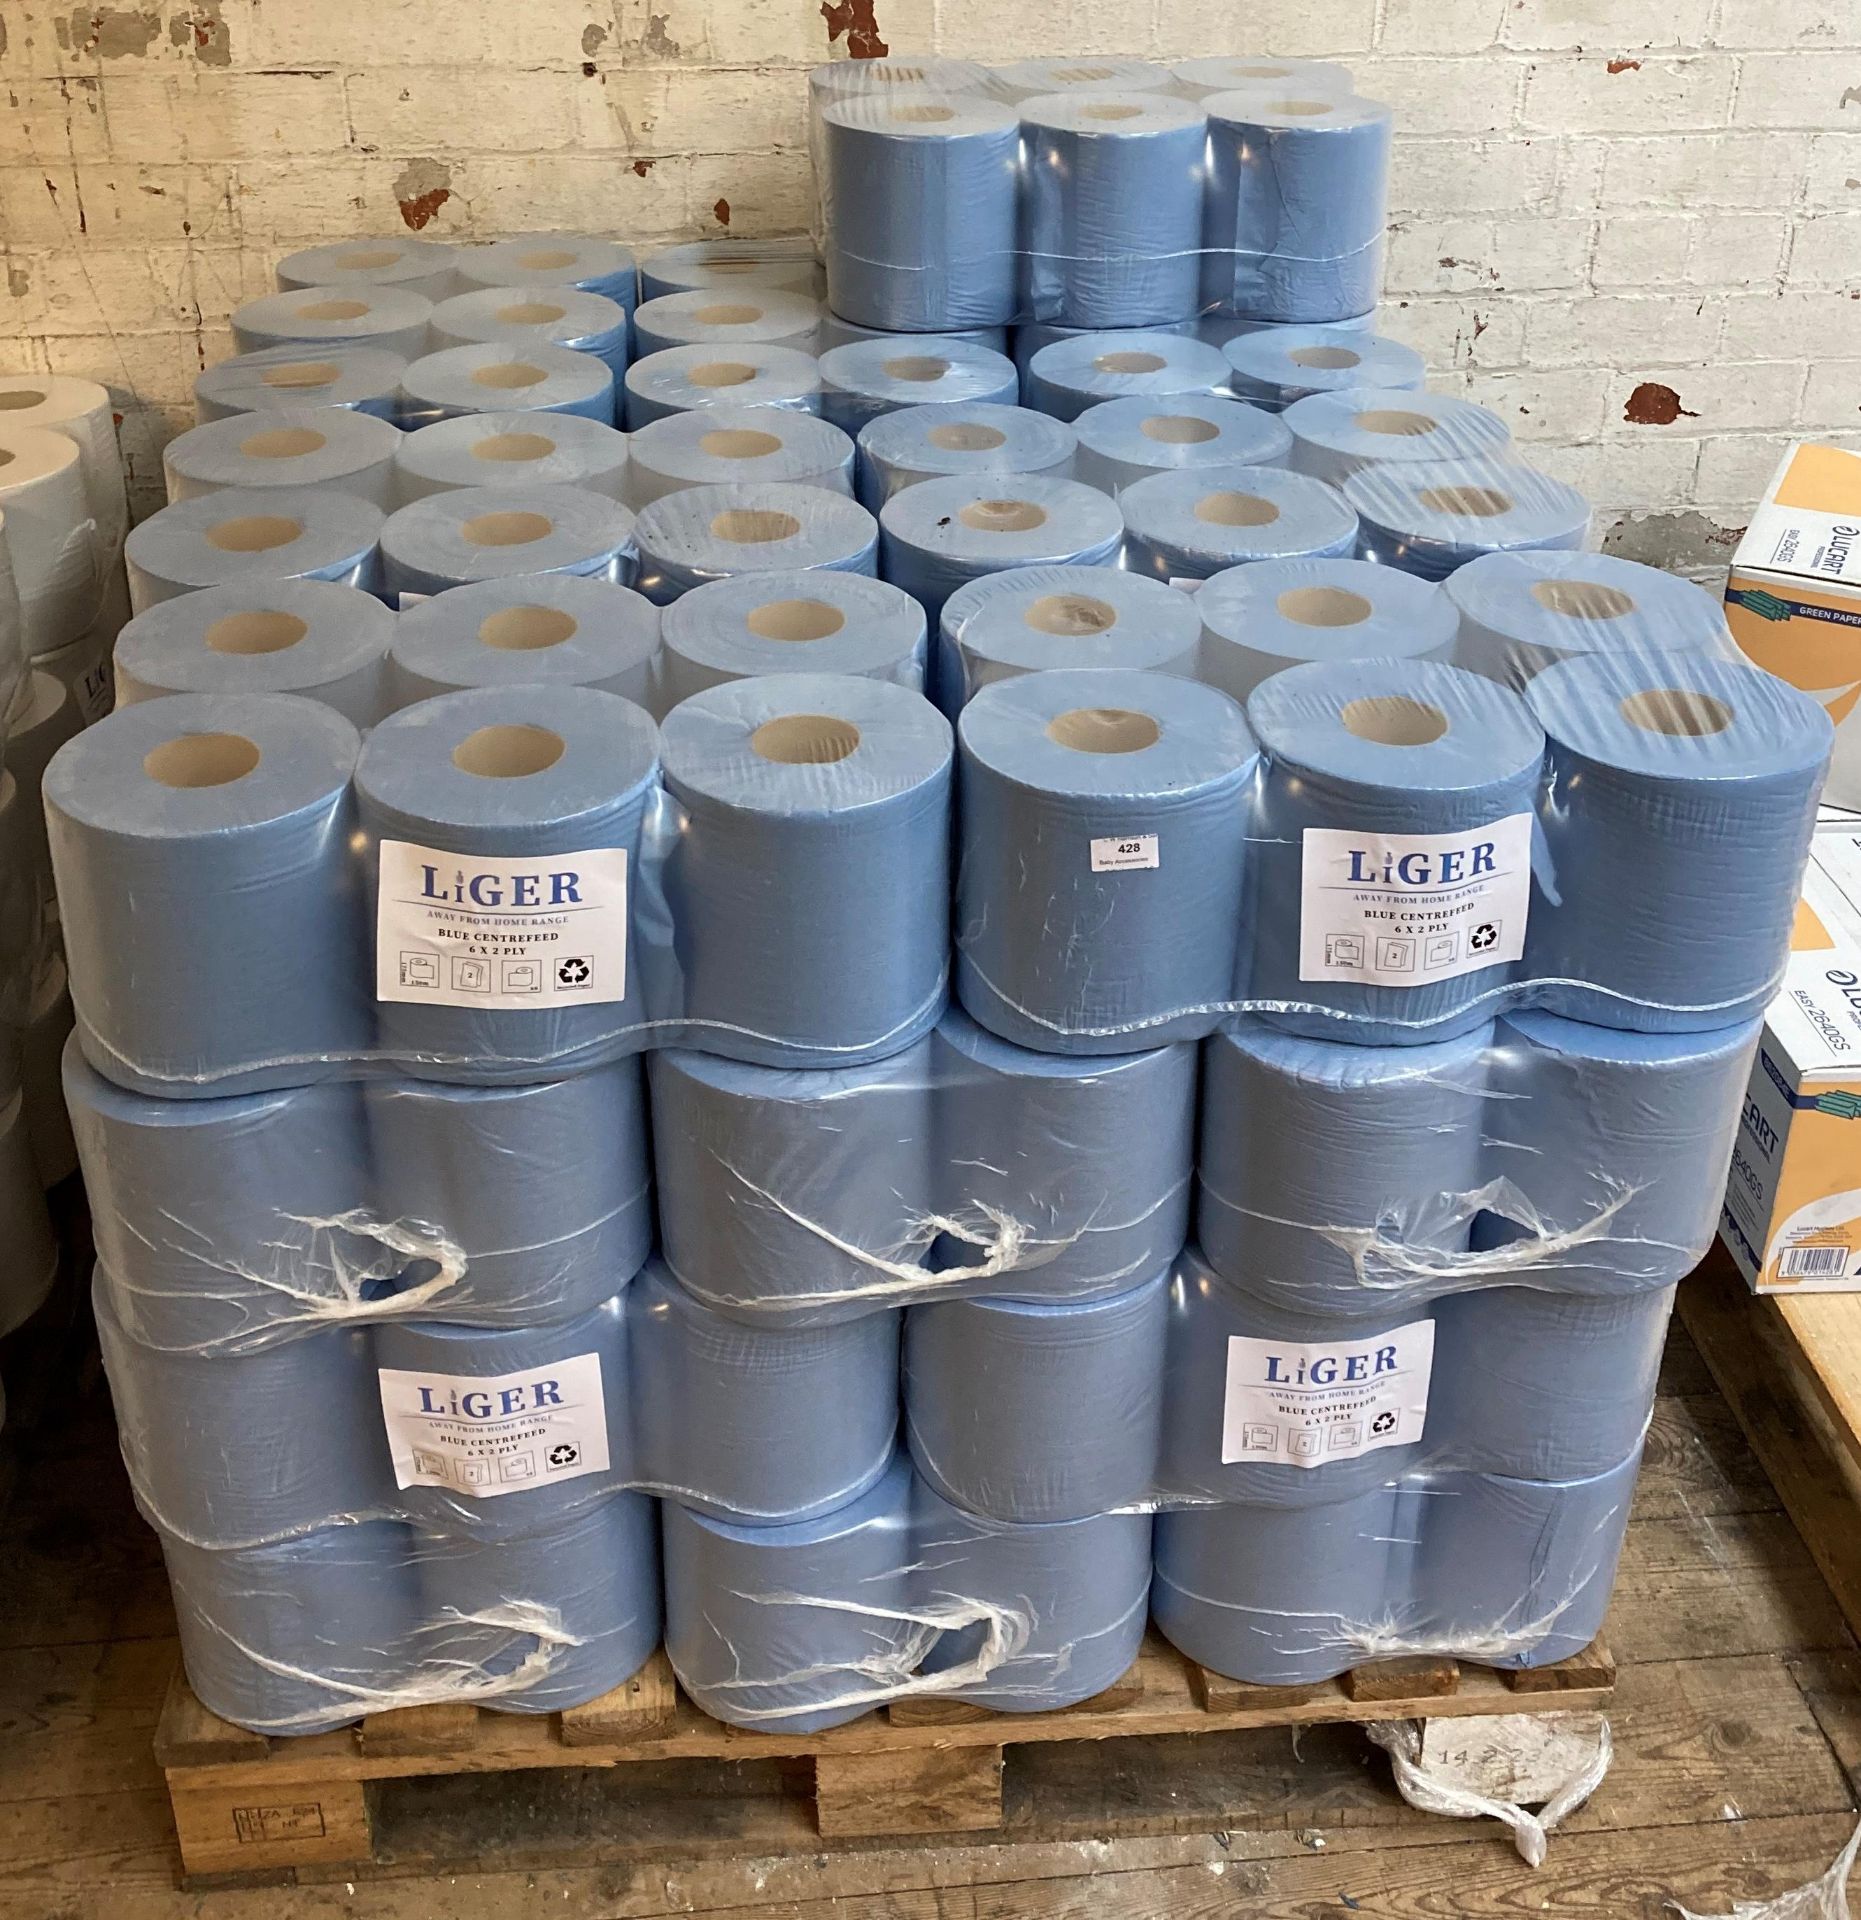 Contents to pallet - 29 x LiGer blue centre feed 6 x 2-ply paper rolls (saleroom location: